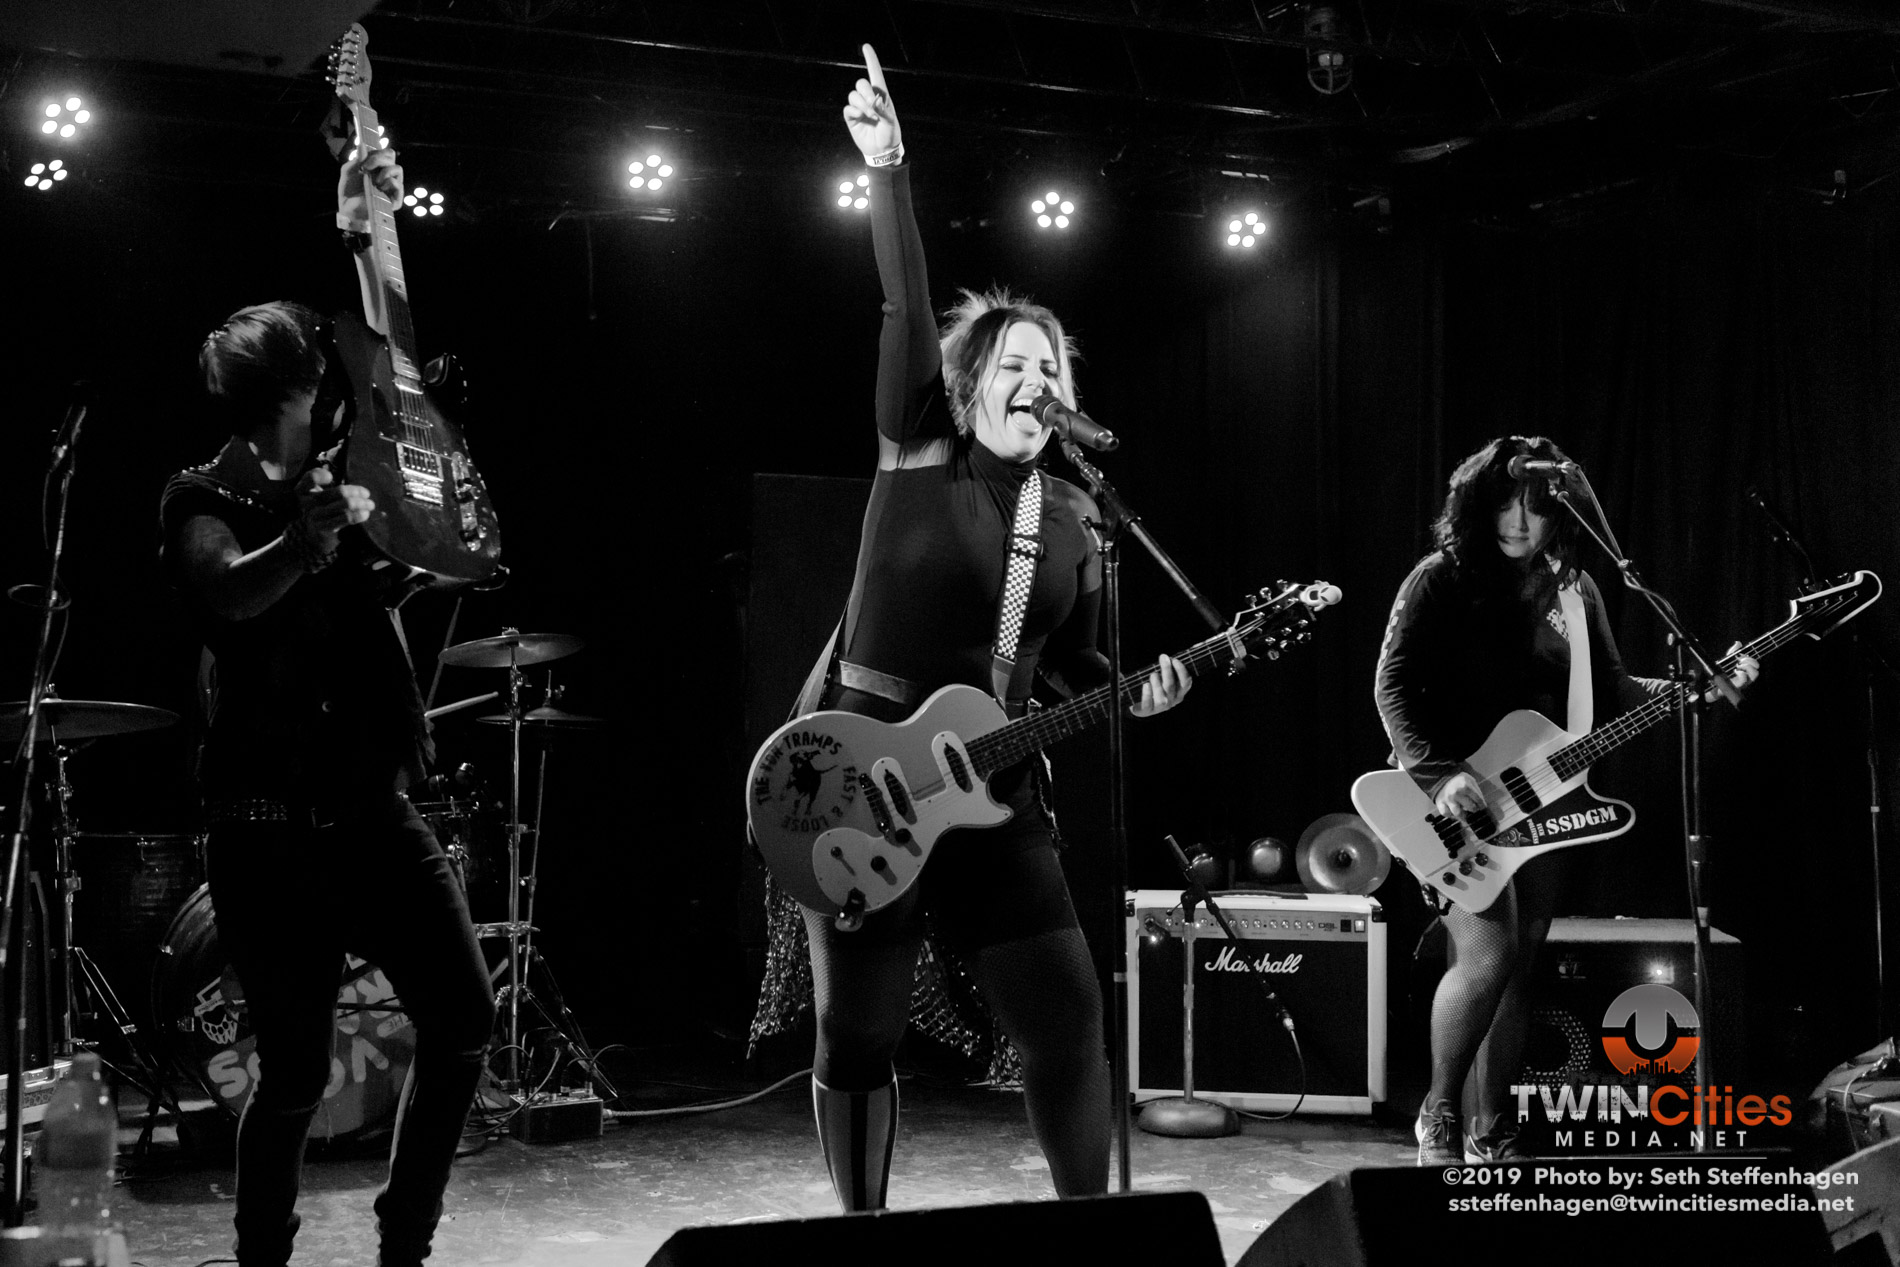 May 2, 2019 - Minneapolis, Minnesota, United States -  The Von Tramps live in concert at the 7th Street Entry opening for Bridge City Sinners.

(Photo by Seth Steffenhagen/Steffenhagen Photography)